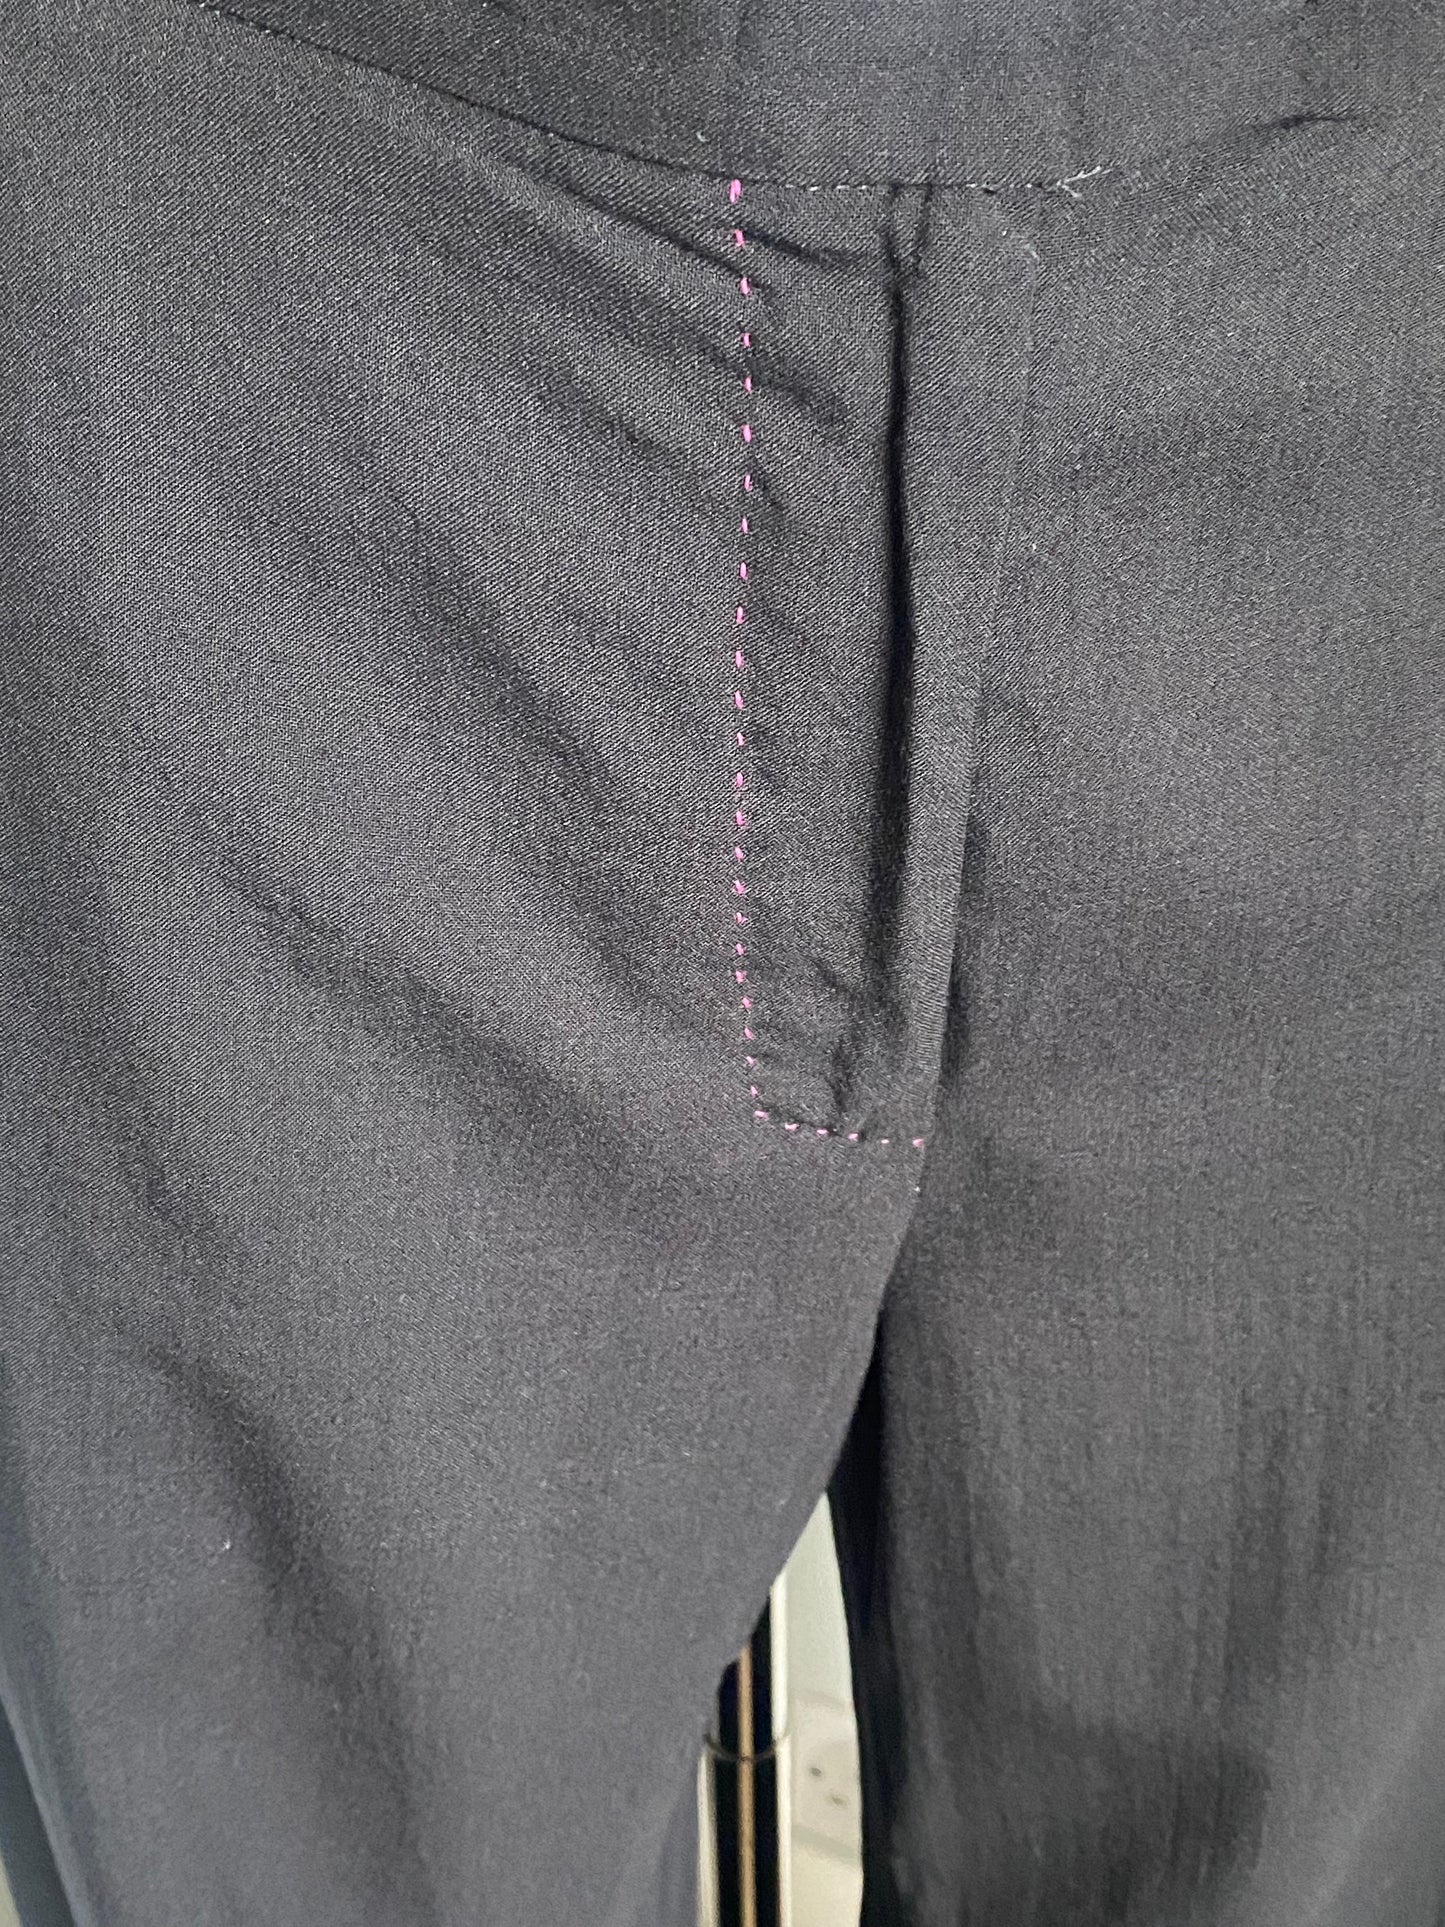 Whistles Black Trousers size UK10 - Pre-loved